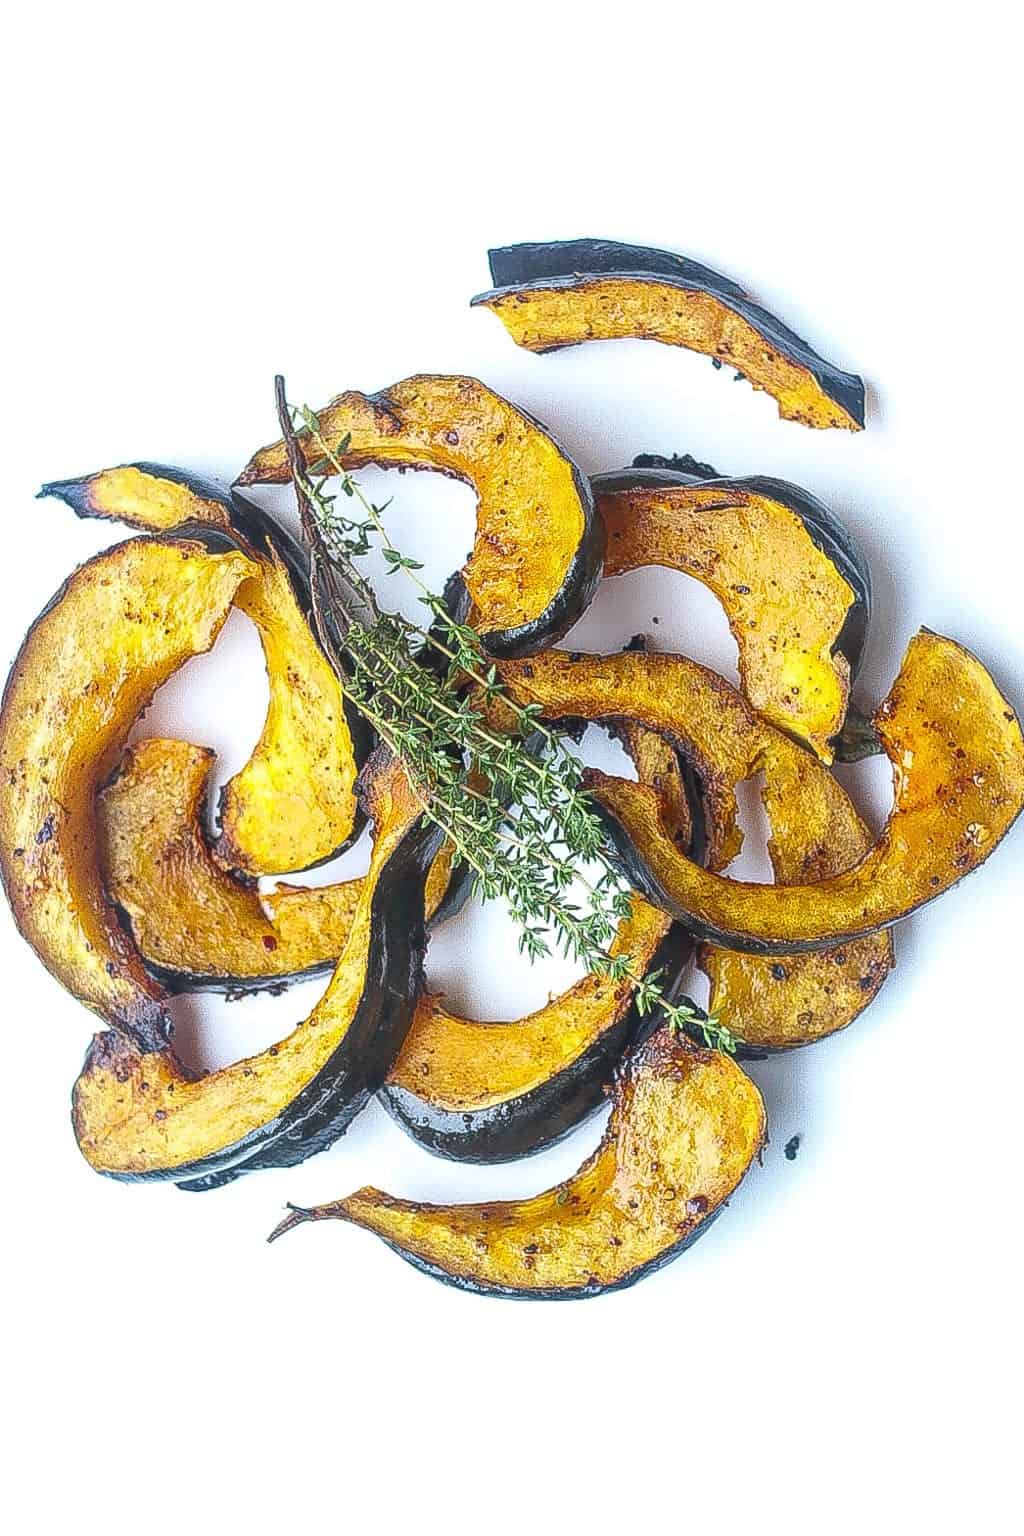 roasted acorn squash slices glazed with chili and honey topped with thyme